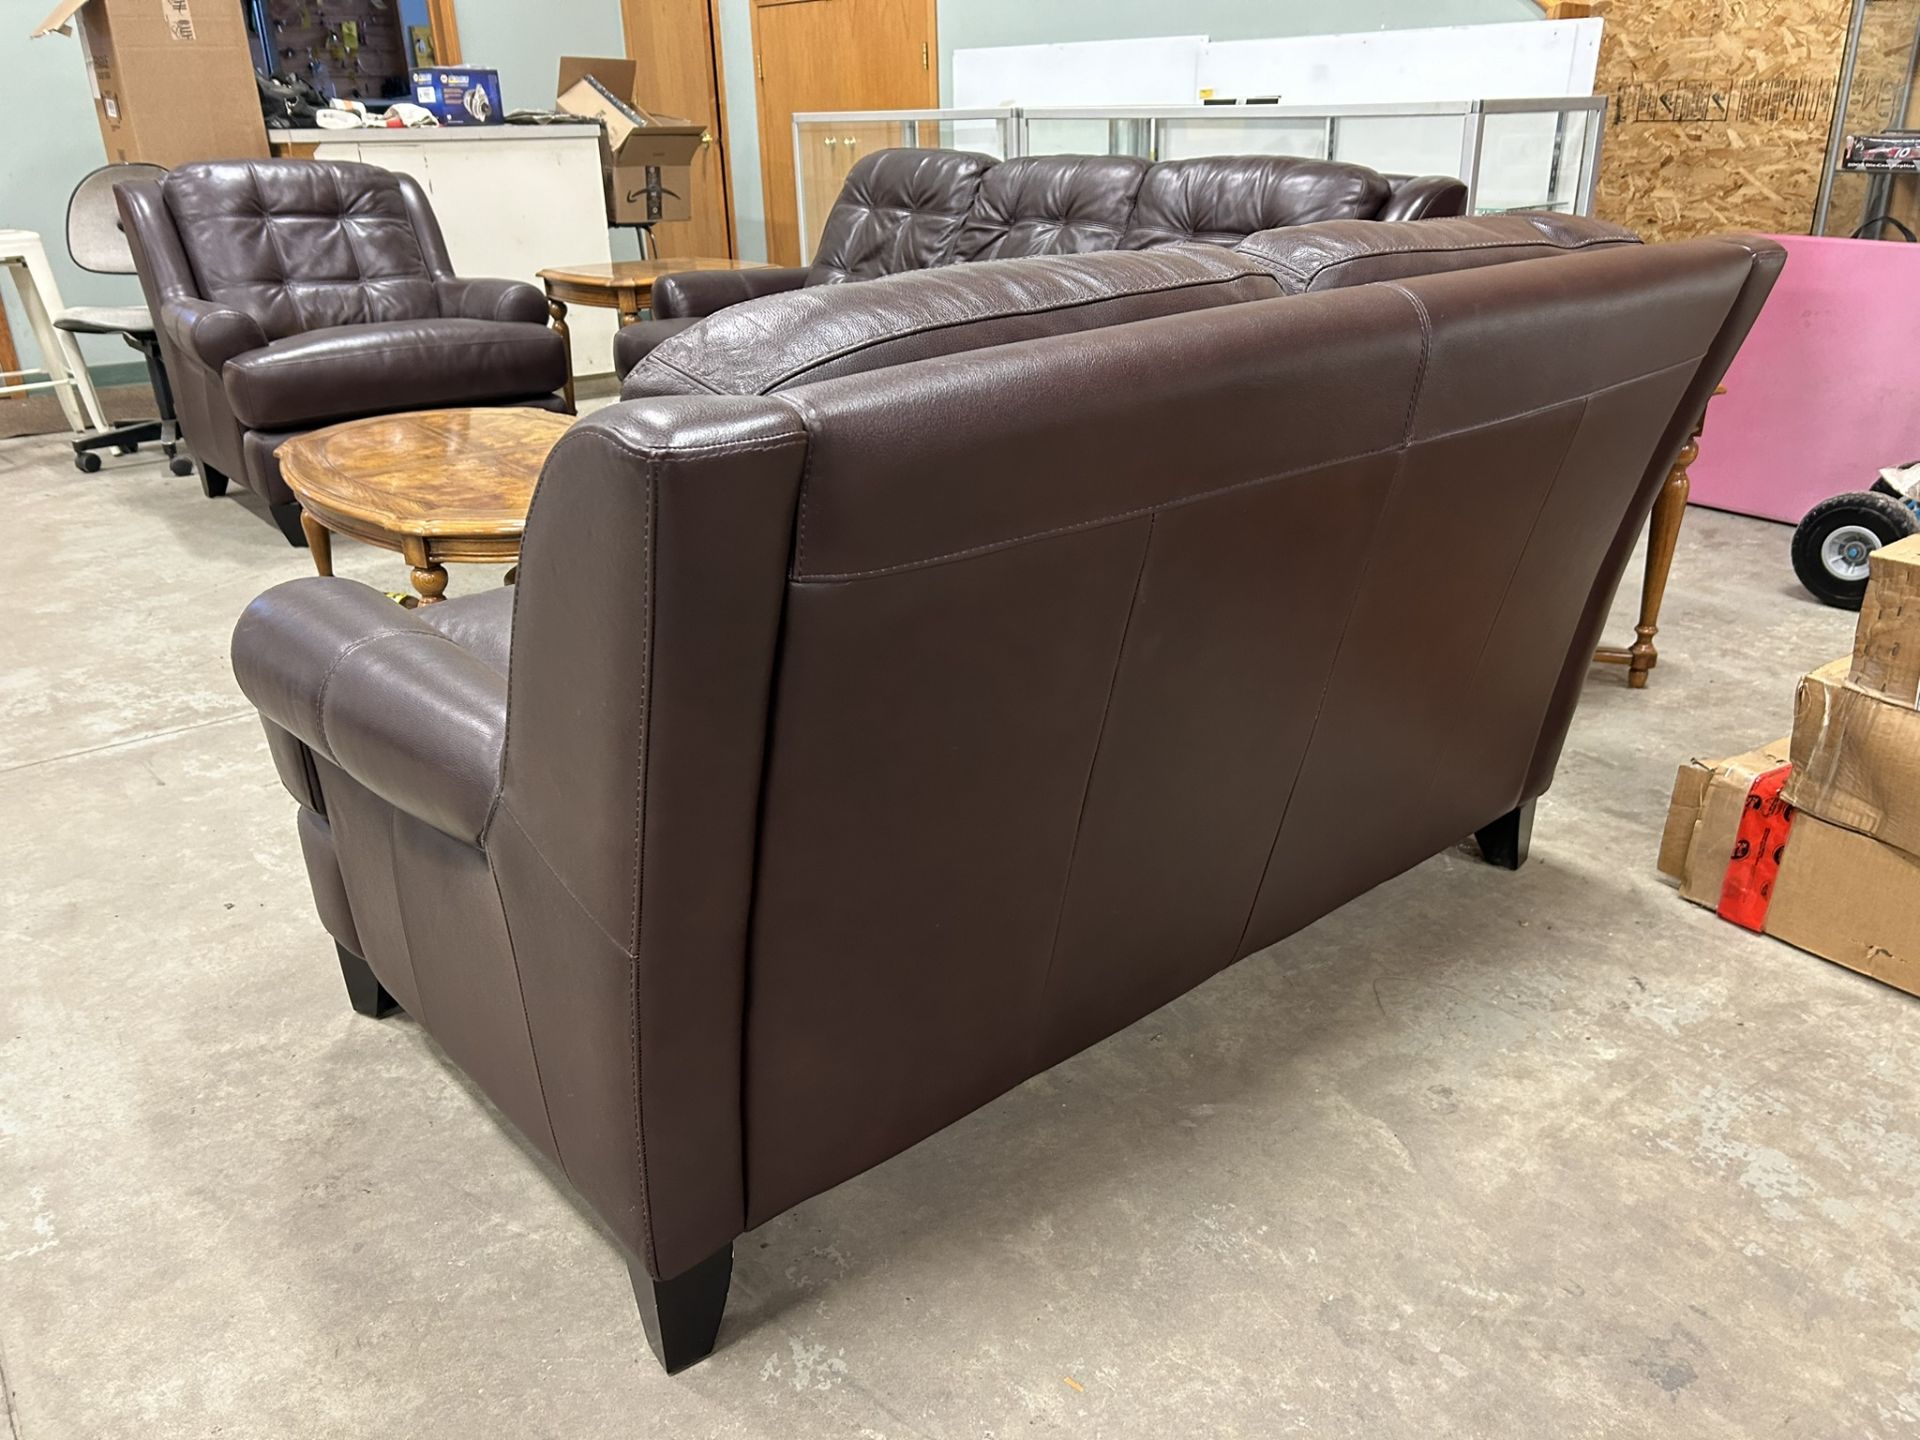 3 PC EXECUTIVE BROWN LEATHER SOFA, LOVESEAT & CHAIR (COFFEE & END TABLES NOT INCLUDED) - Image 3 of 8